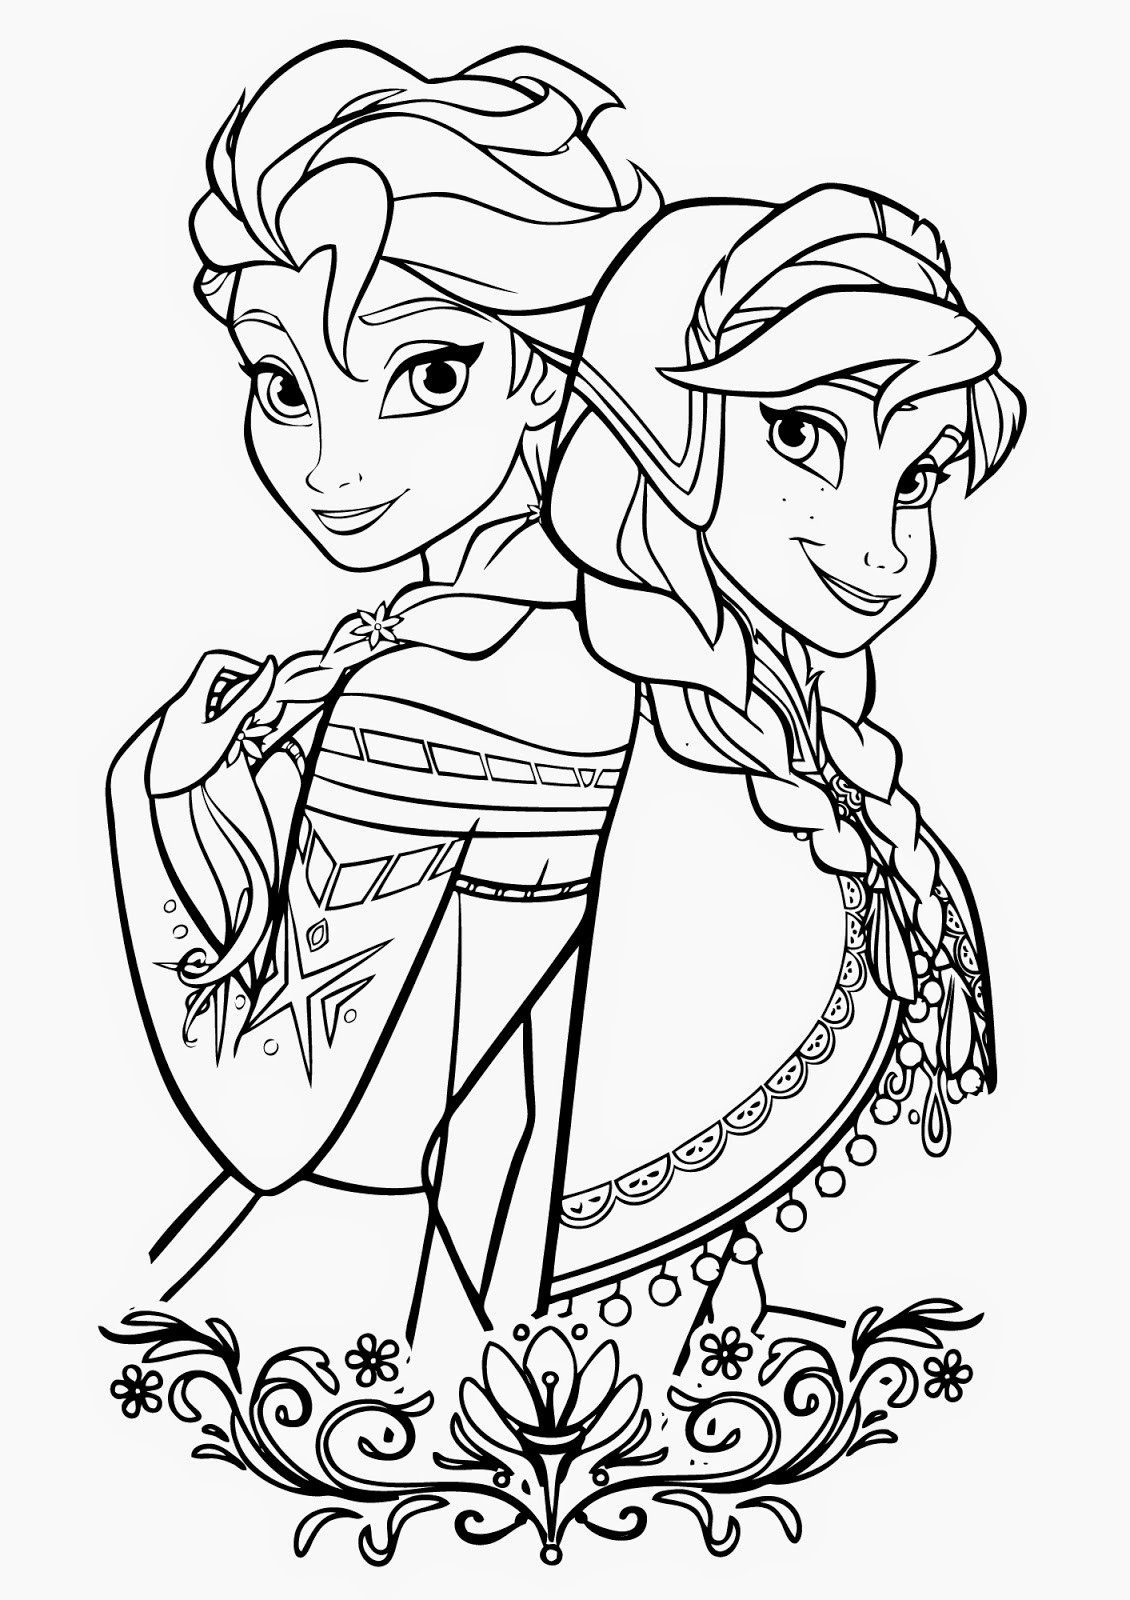 Printable Disney Coloring Pages
 15 Beautiful Disney Frozen Coloring Pages Free Instant